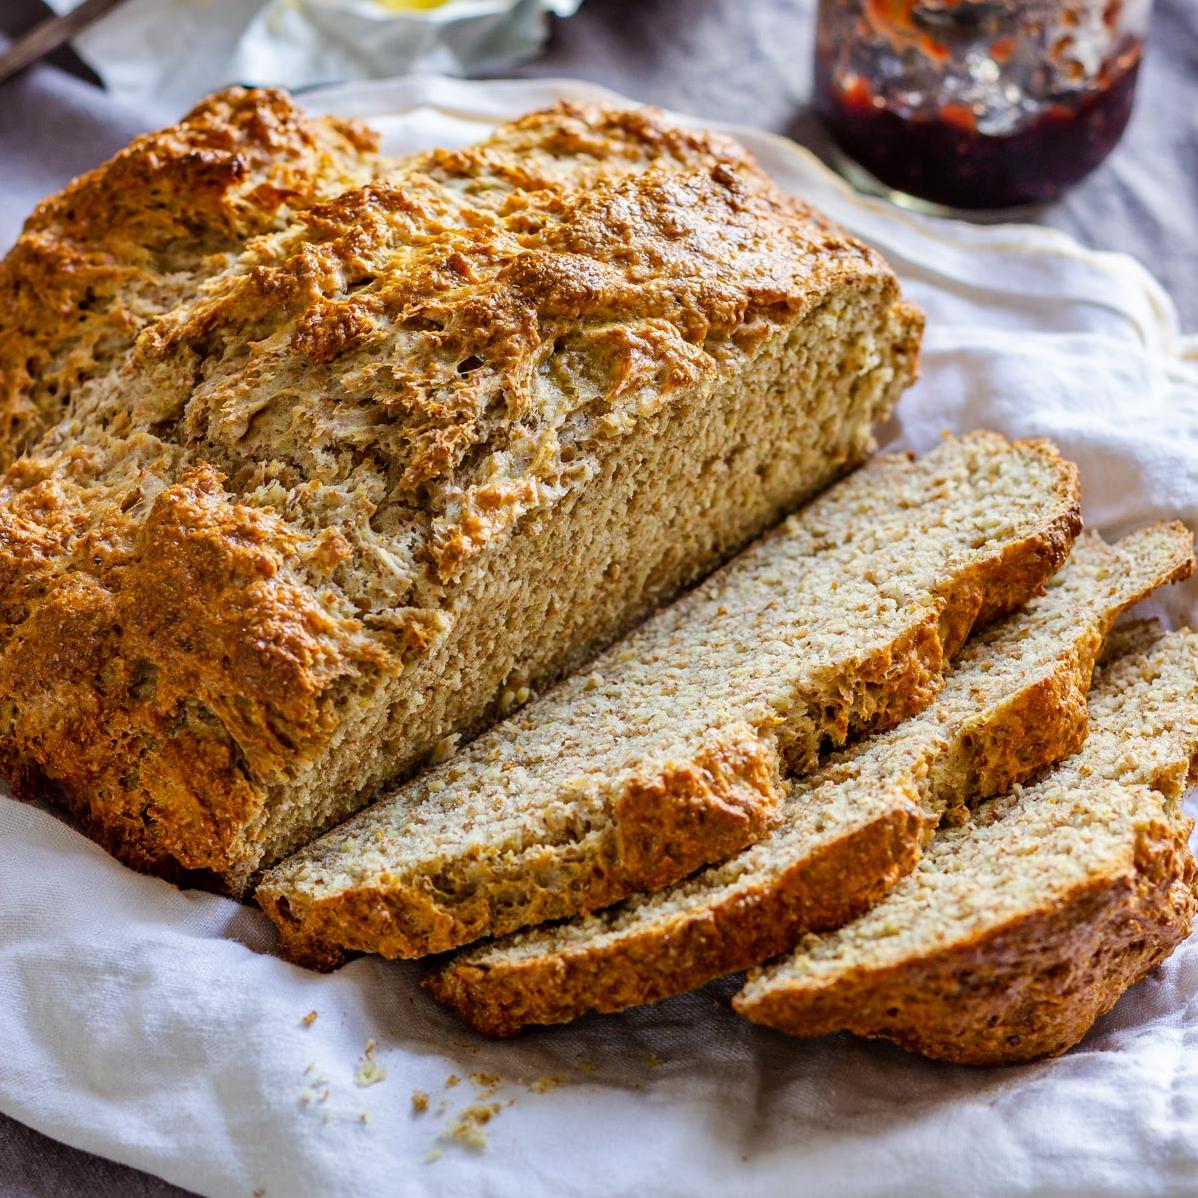  This traditional Irish brown bread recipe has been passed down for generations, and it's easy to see why.